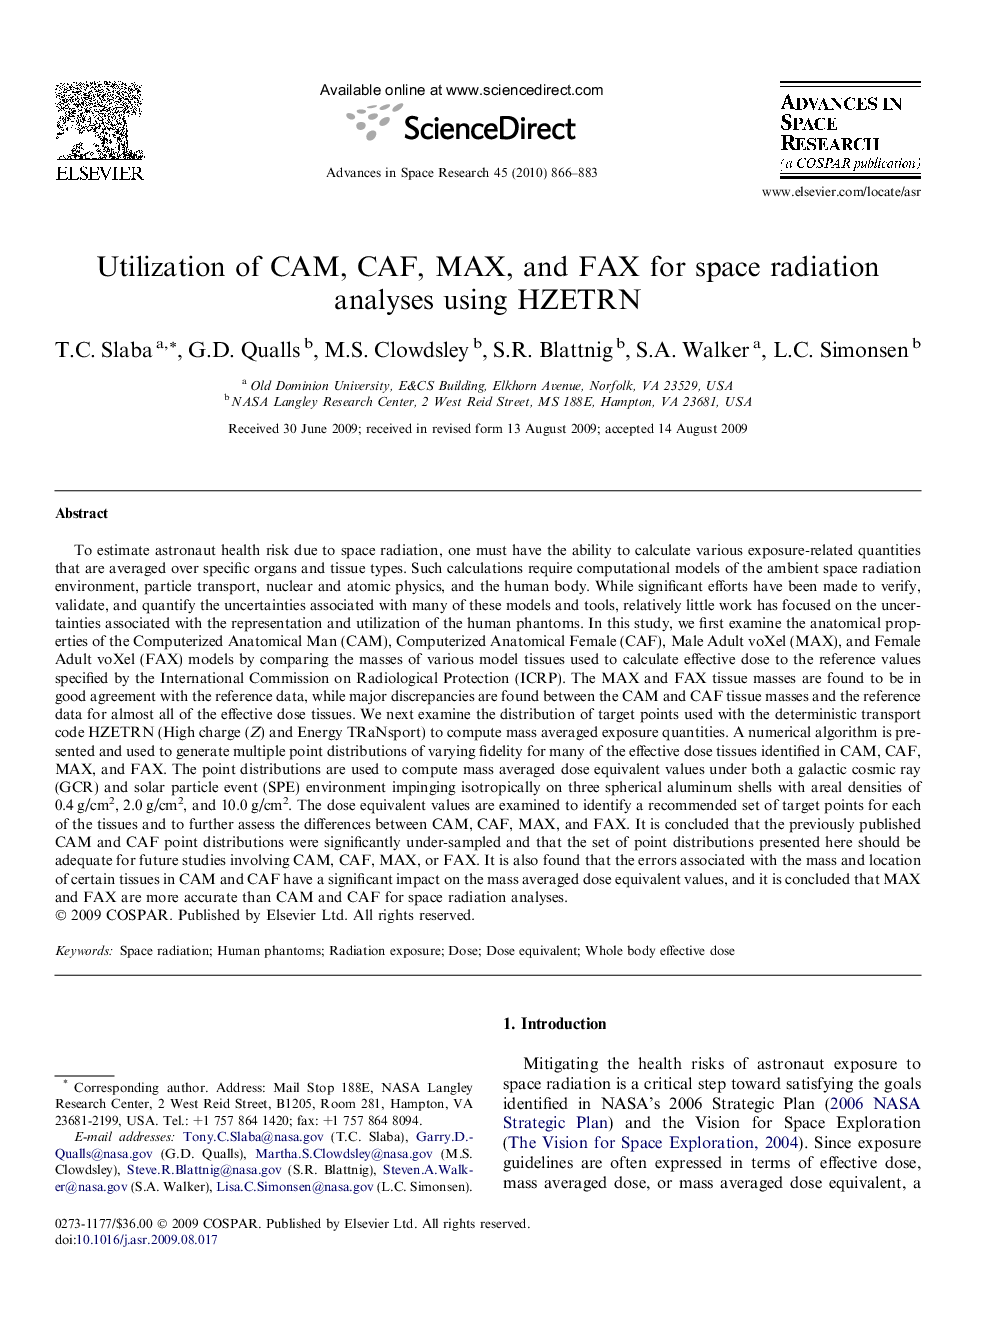 Utilization of CAM, CAF, MAX, and FAX for space radiation analyses using HZETRN